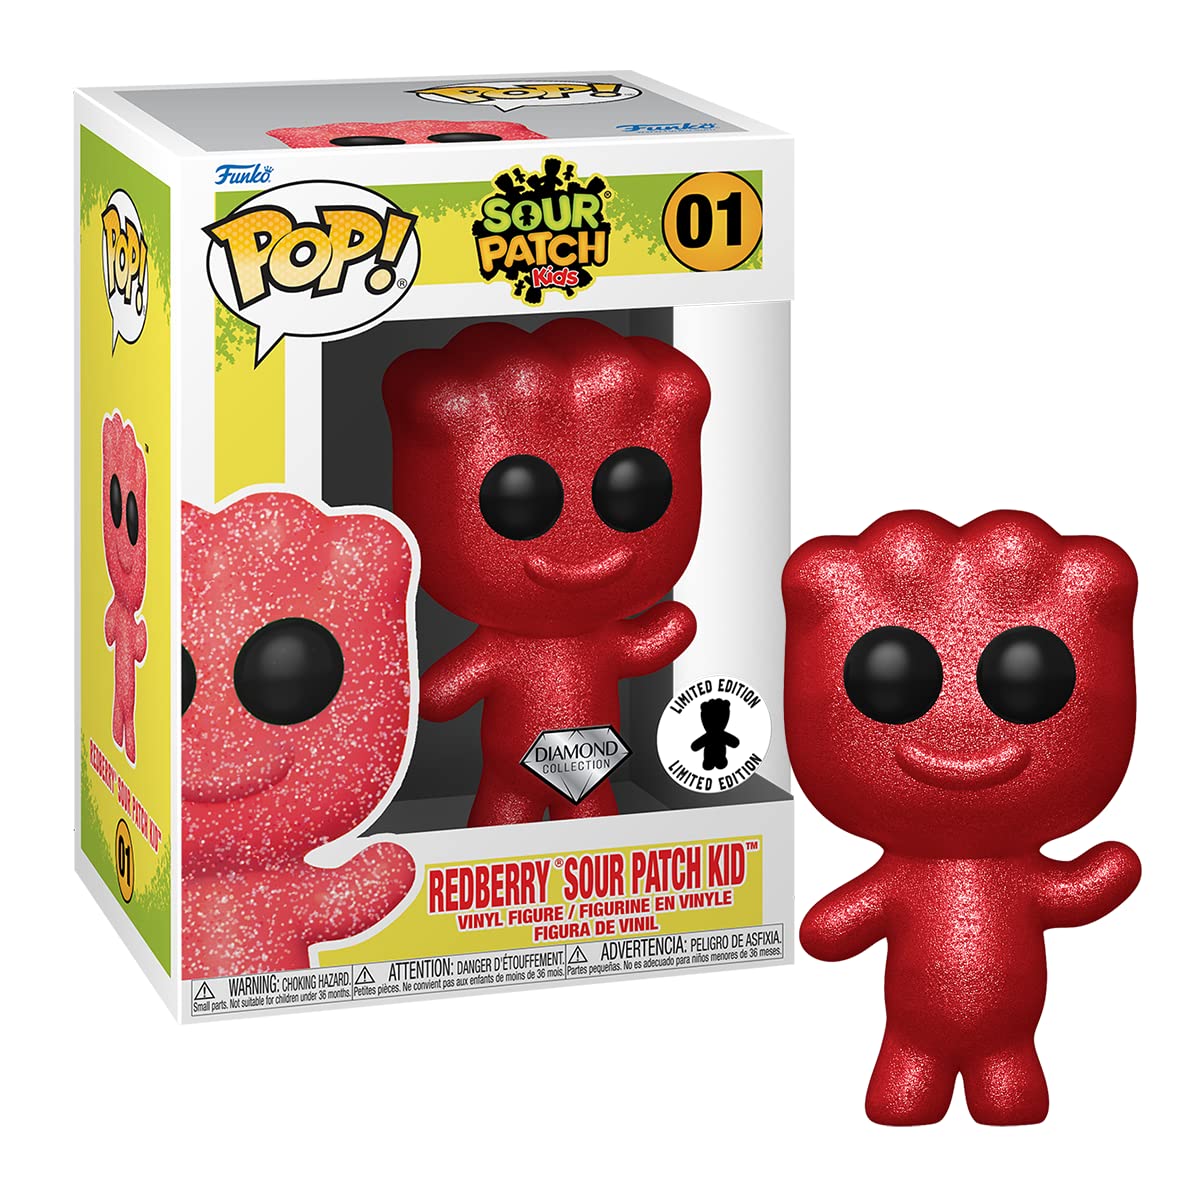 Funko POP! Sour Patch Kids Redberry Sour Patch Kid #01 [Diamond Collection] Exclusive